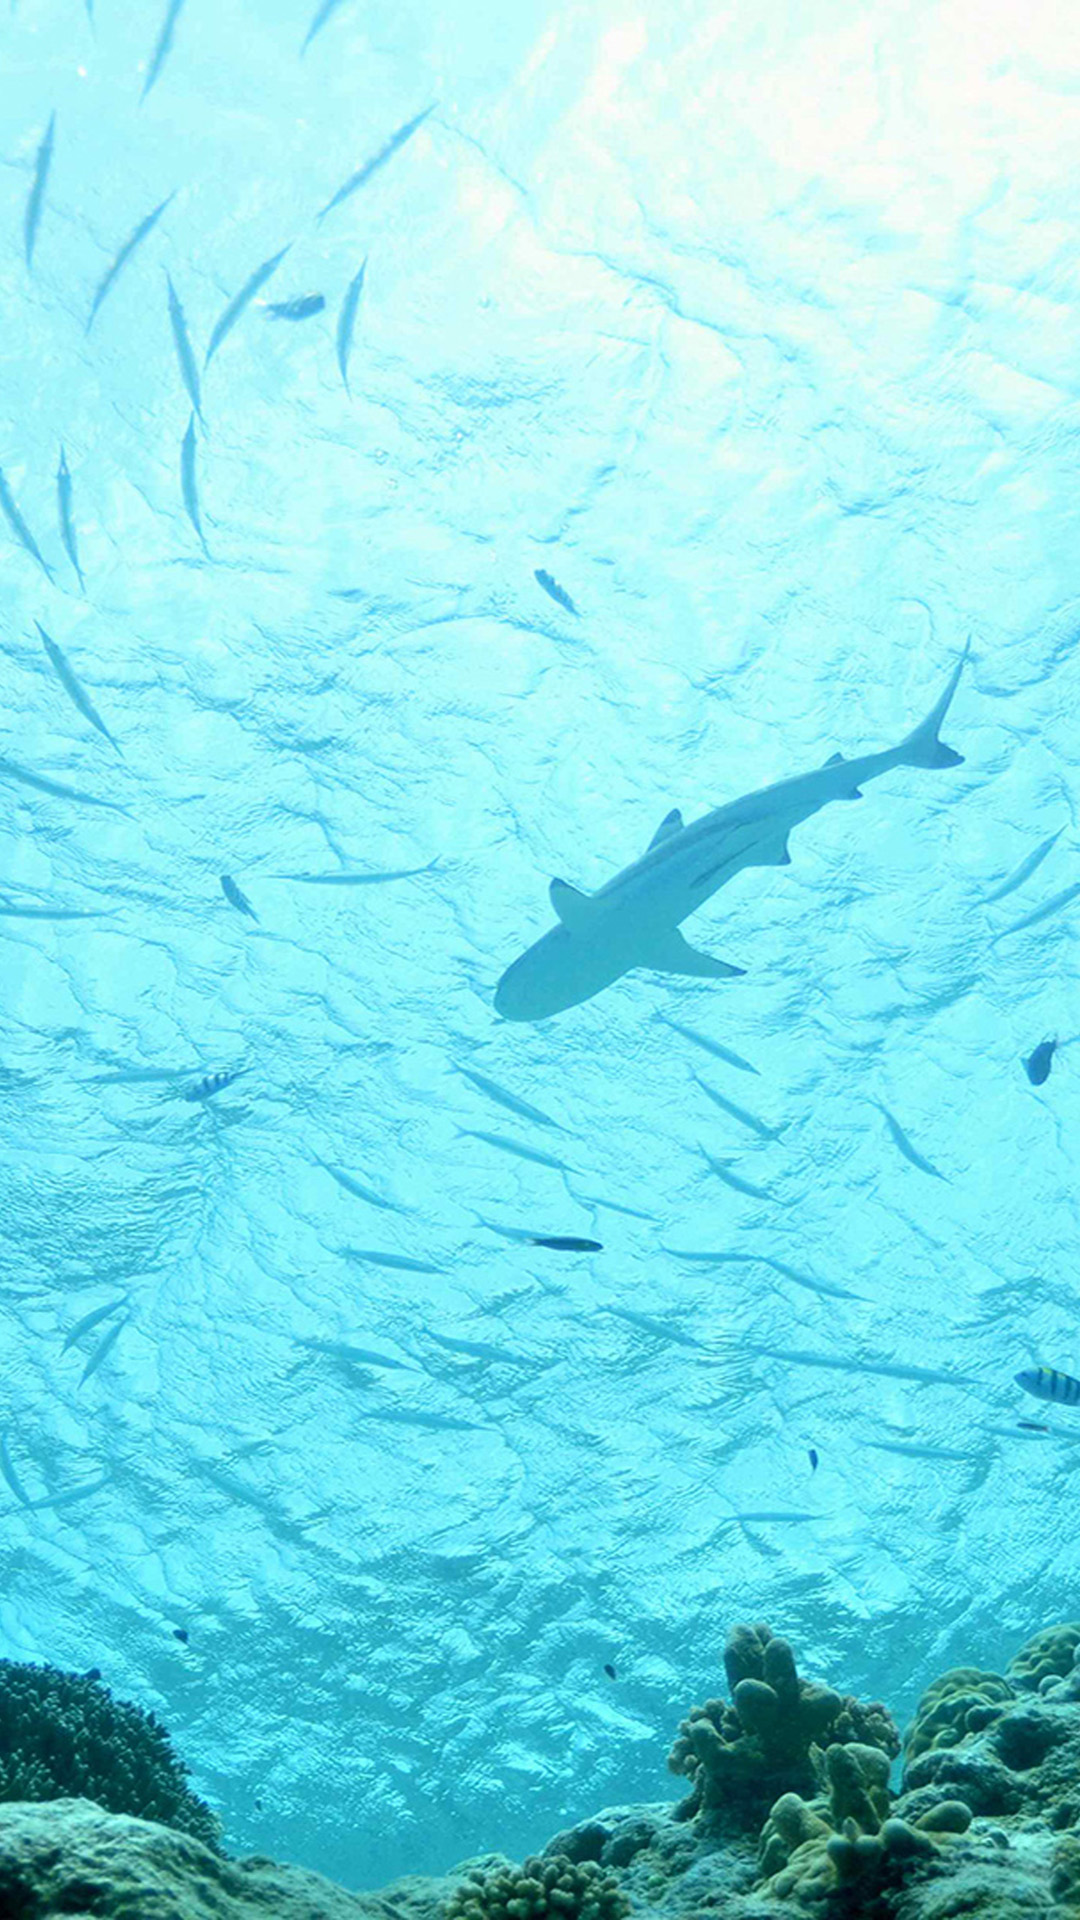 Sea Sharks Wallpaper For iPhone Plus